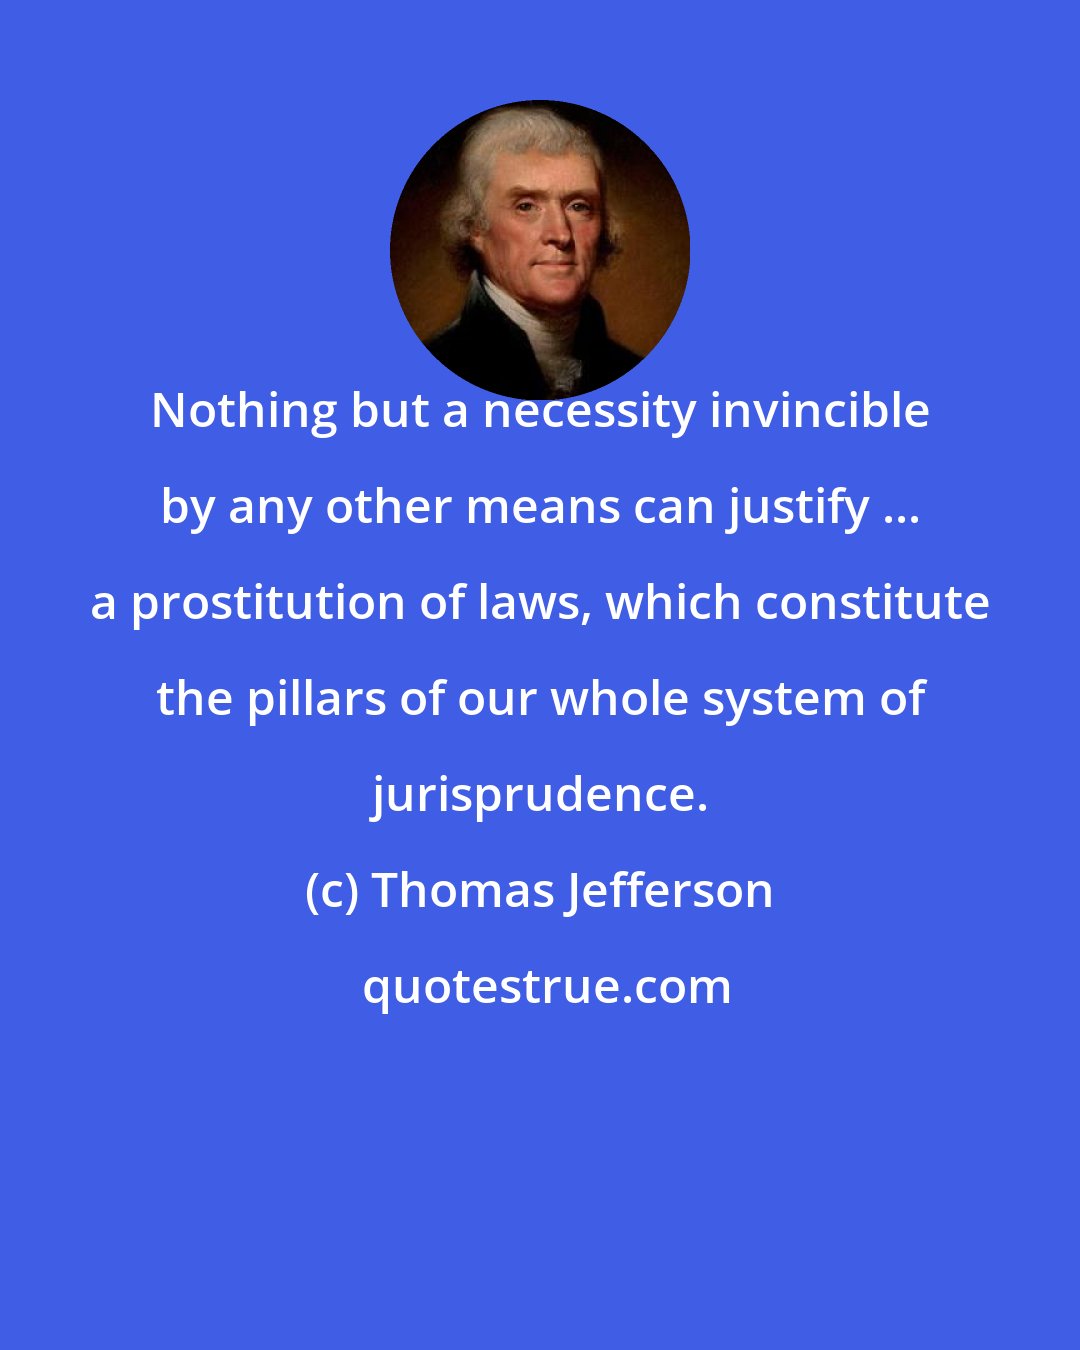 Thomas Jefferson: Nothing but a necessity invincible by any other means can justify ... a prostitution of laws, which constitute the pillars of our whole system of jurisprudence.